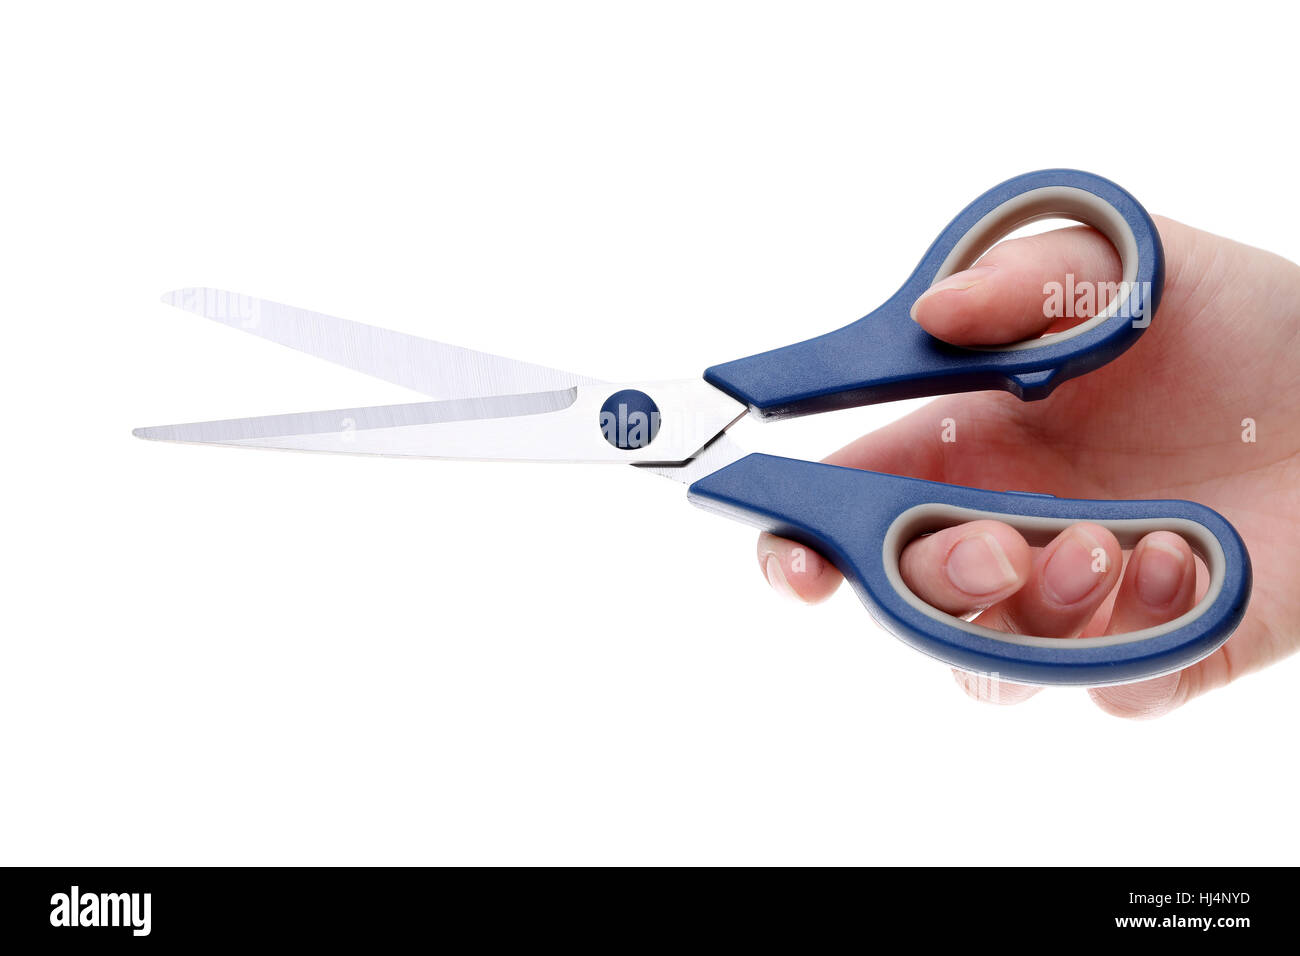 https://c8.alamy.com/comp/HJ4NYD/hand-holding-handled-scissors-isolated-on-white-background-HJ4NYD.jpg